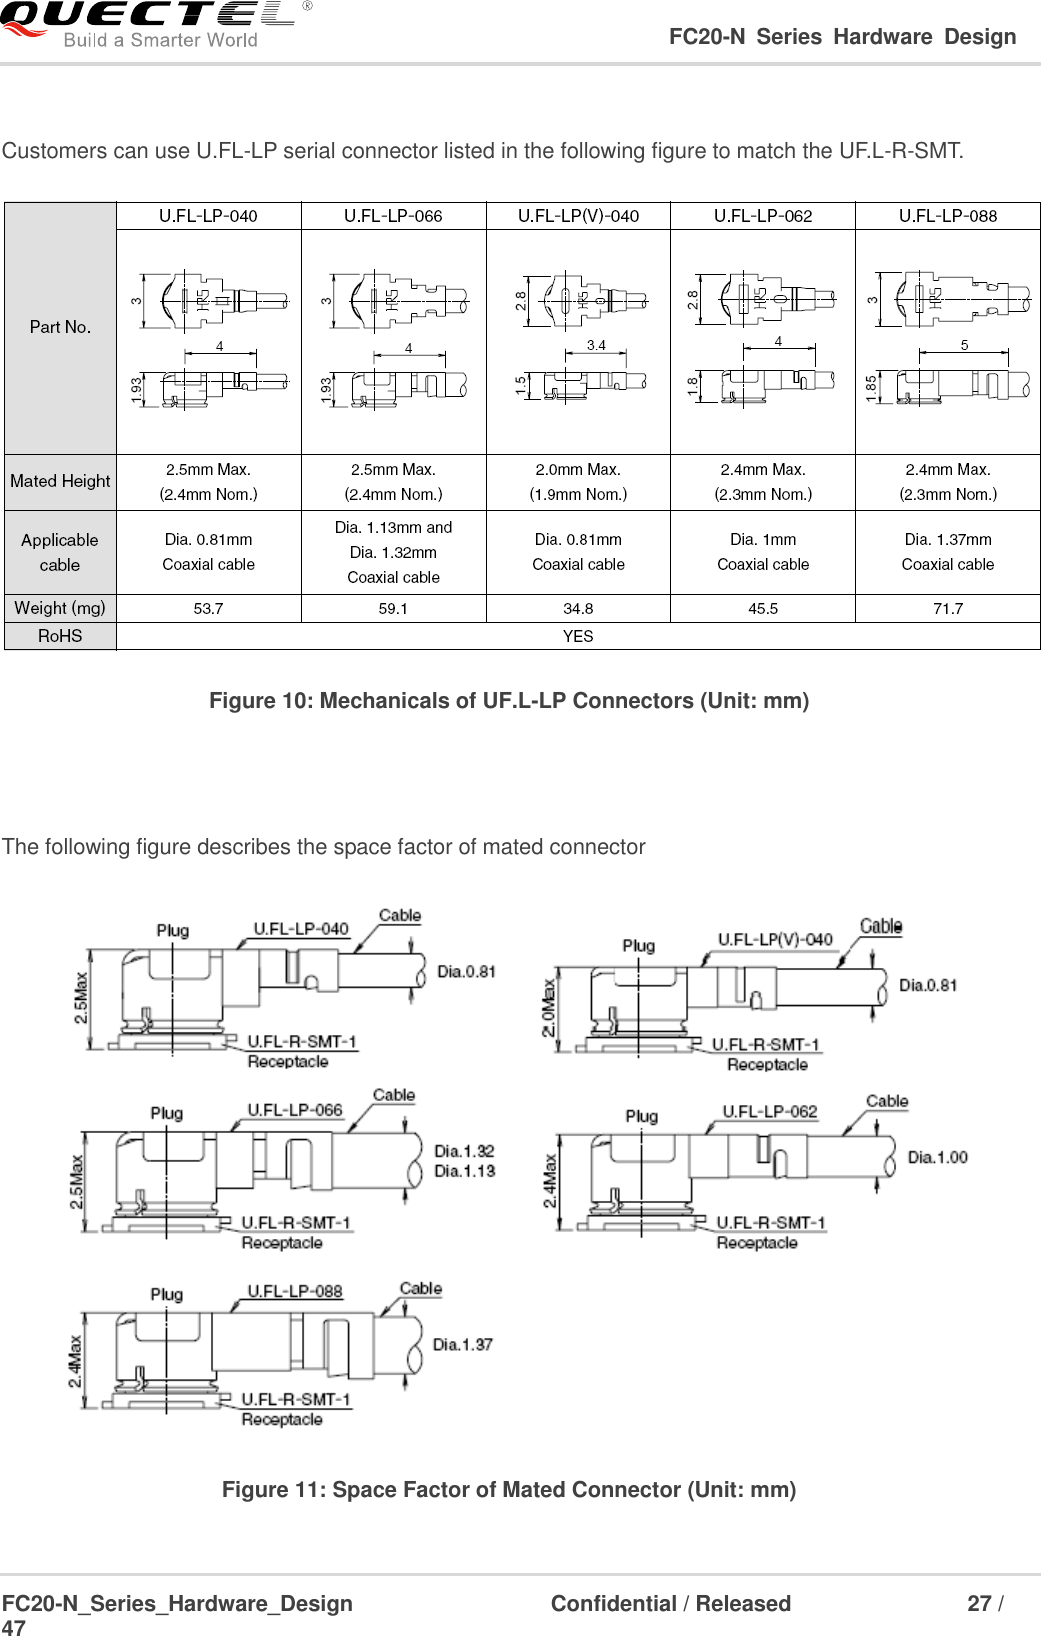                                                                                                                                     FC20-N  Series  Hardware  Design  FC20-N_Series_Hardware_Design                                Confidential / Released                    27 / 47     Customers can use U.FL-LP serial connector listed in the following figure to match the UF.L-R-SMT.   Figure 10: Mechanicals of UF.L-LP Connectors (Unit: mm)    The following figure describes the space factor of mated connector  Figure 11: Space Factor of Mated Connector (Unit: mm)  